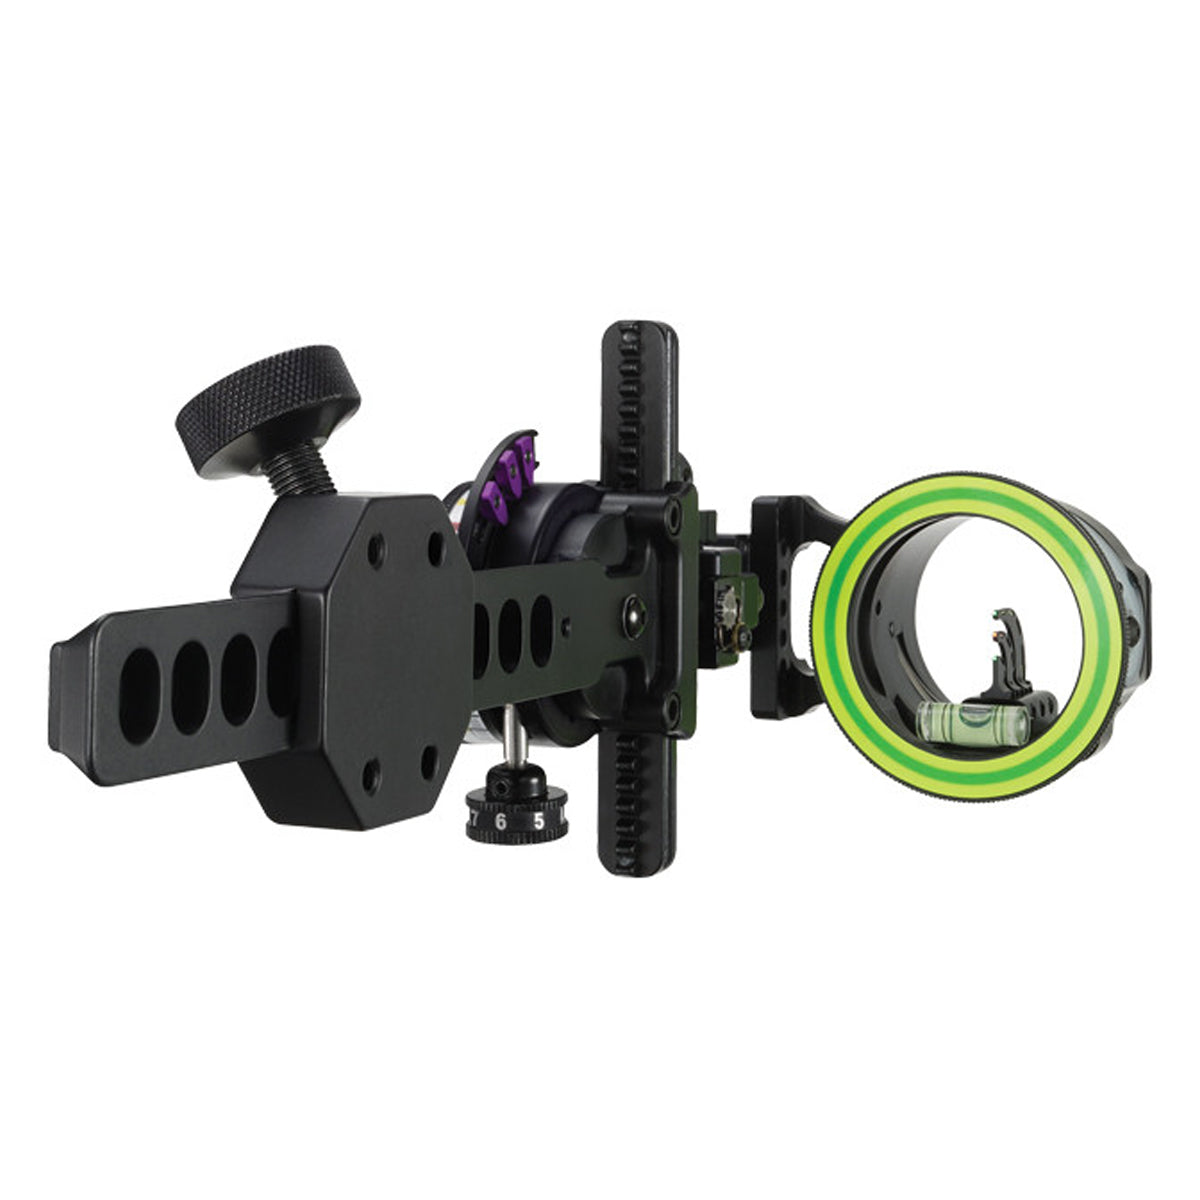 Spot Hogg Hogg Father Triple Stack MRT Bow Sight in  by GOHUNT | Spot Hogg - GOHUNT Shop